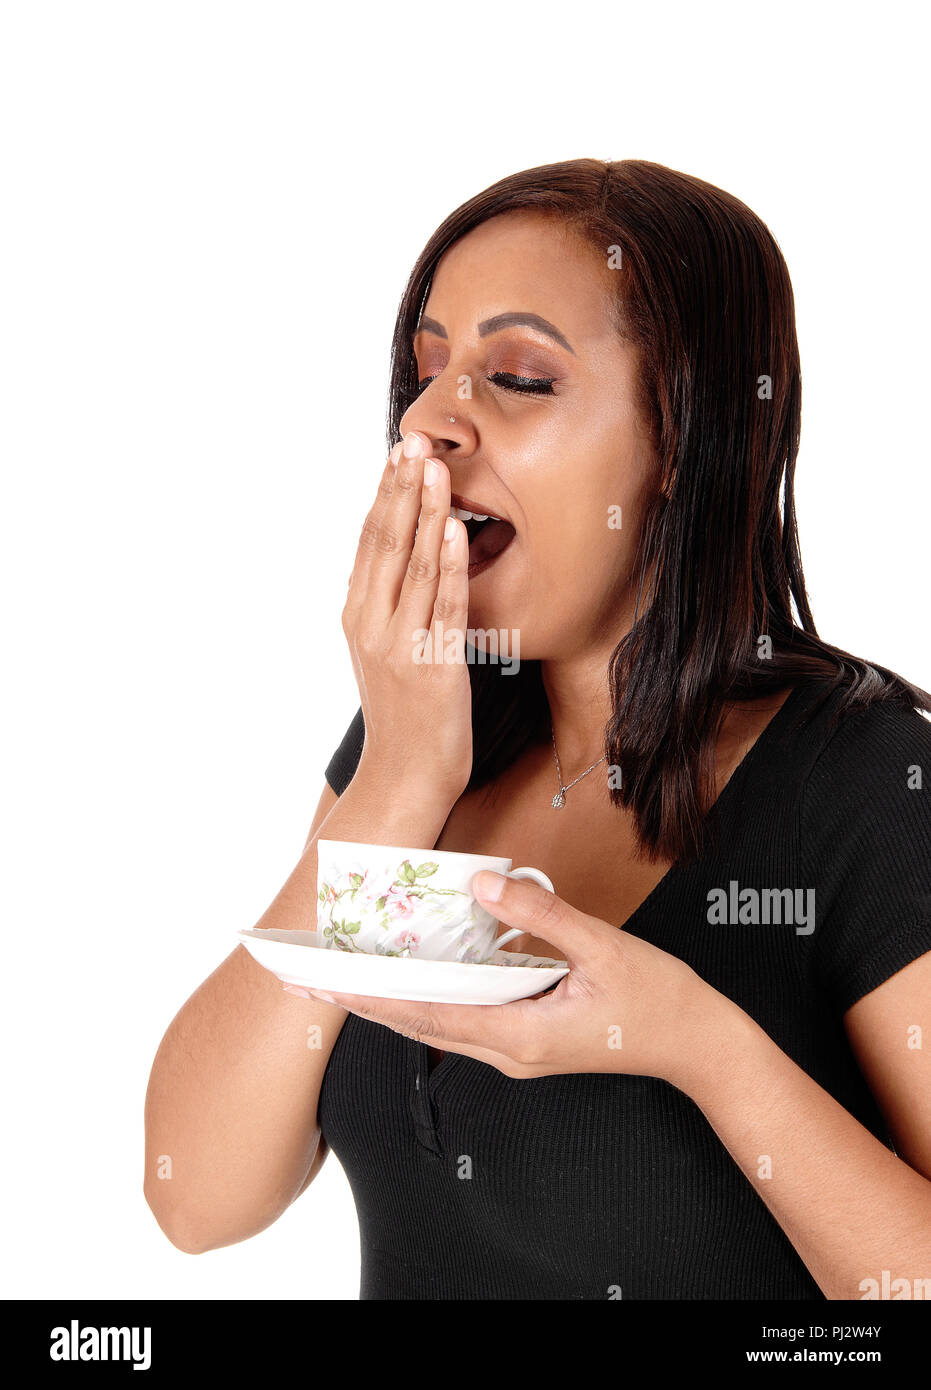 A beautiful young woman holding a coffee cup in her hand and yawning with her hand over her mouth, isolated for white background Stock Photo